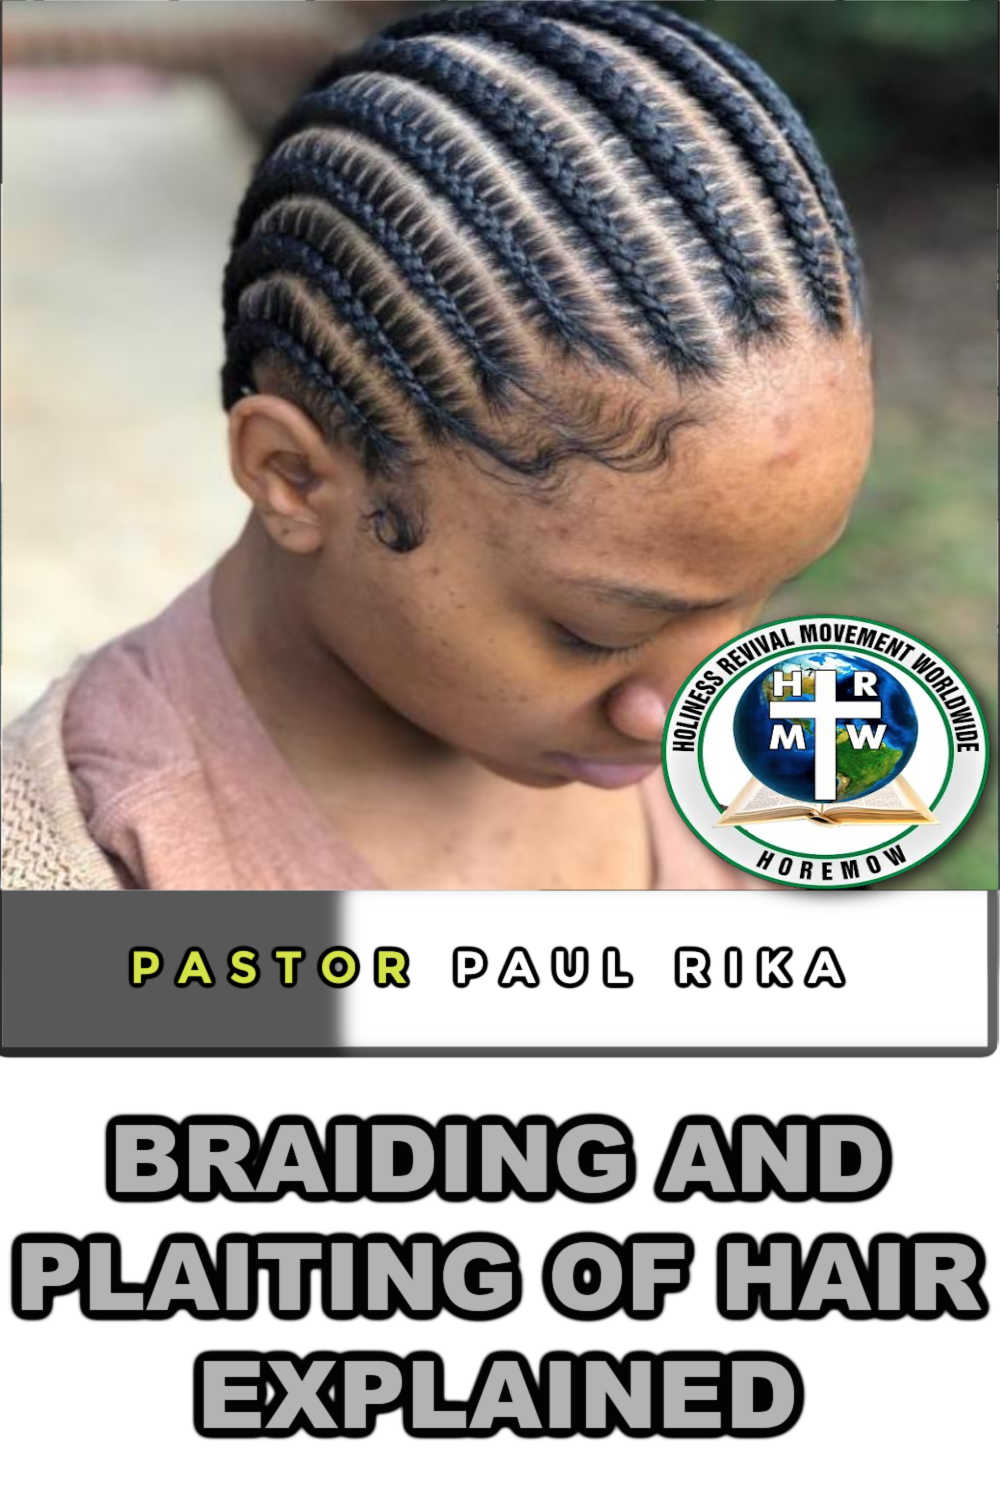 BRAIDING AND PLAITING OF HAIR EXPLAINED 